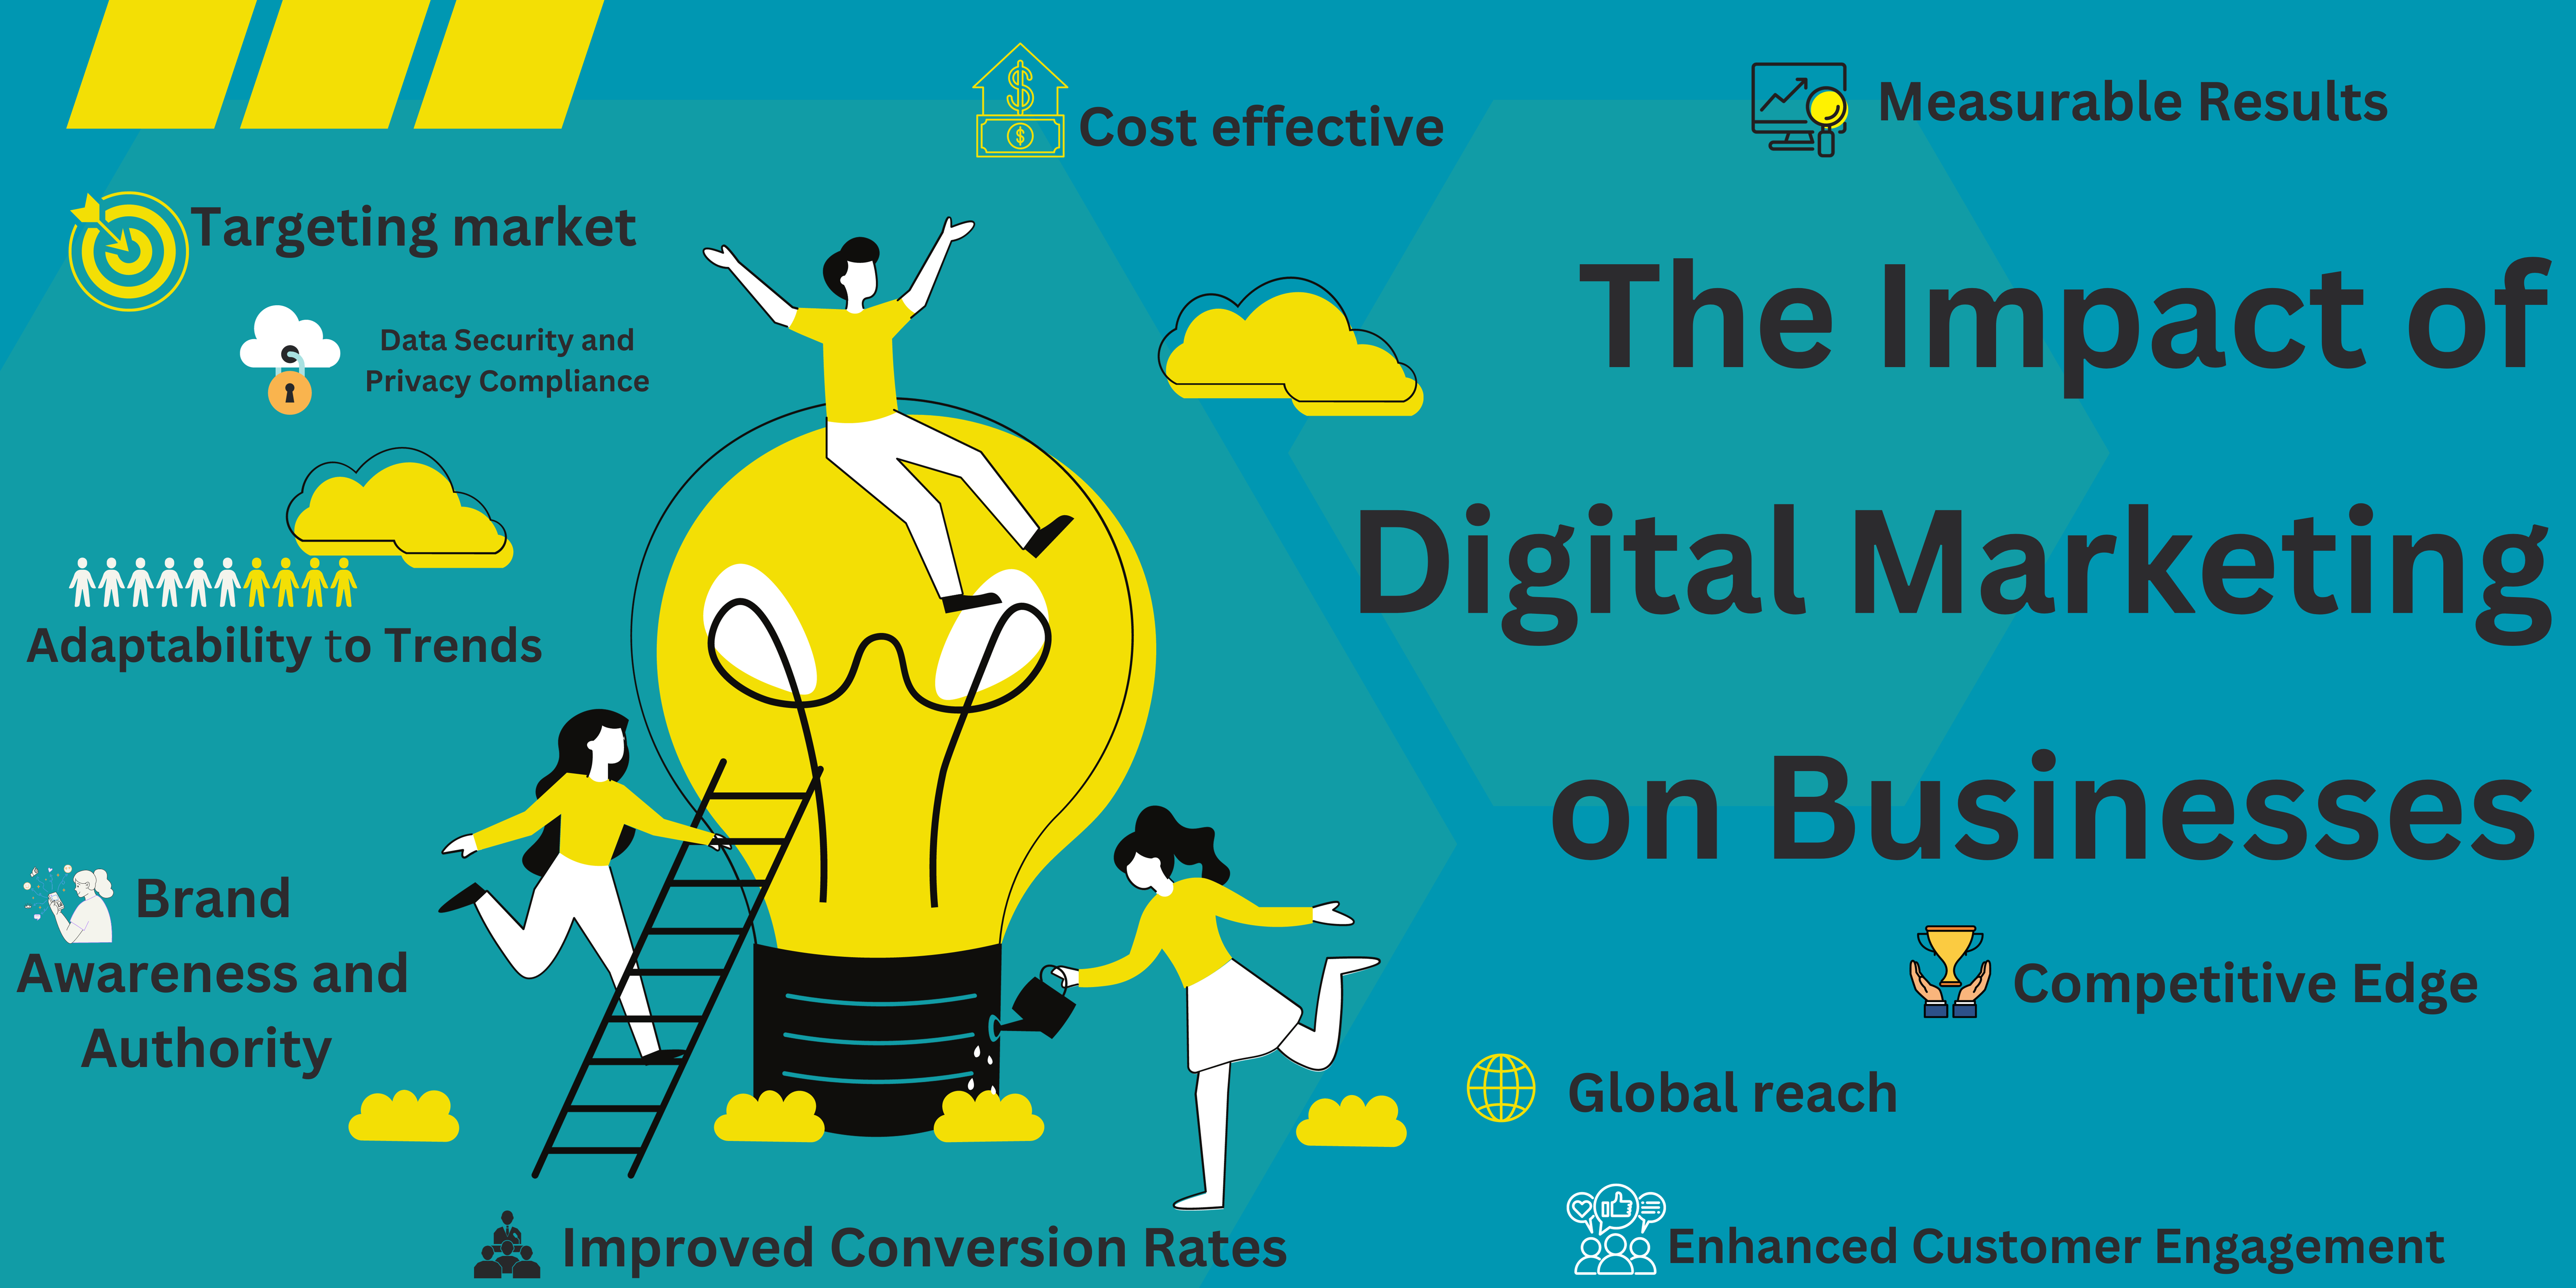 The Impact of Digital Marketing on Businesses